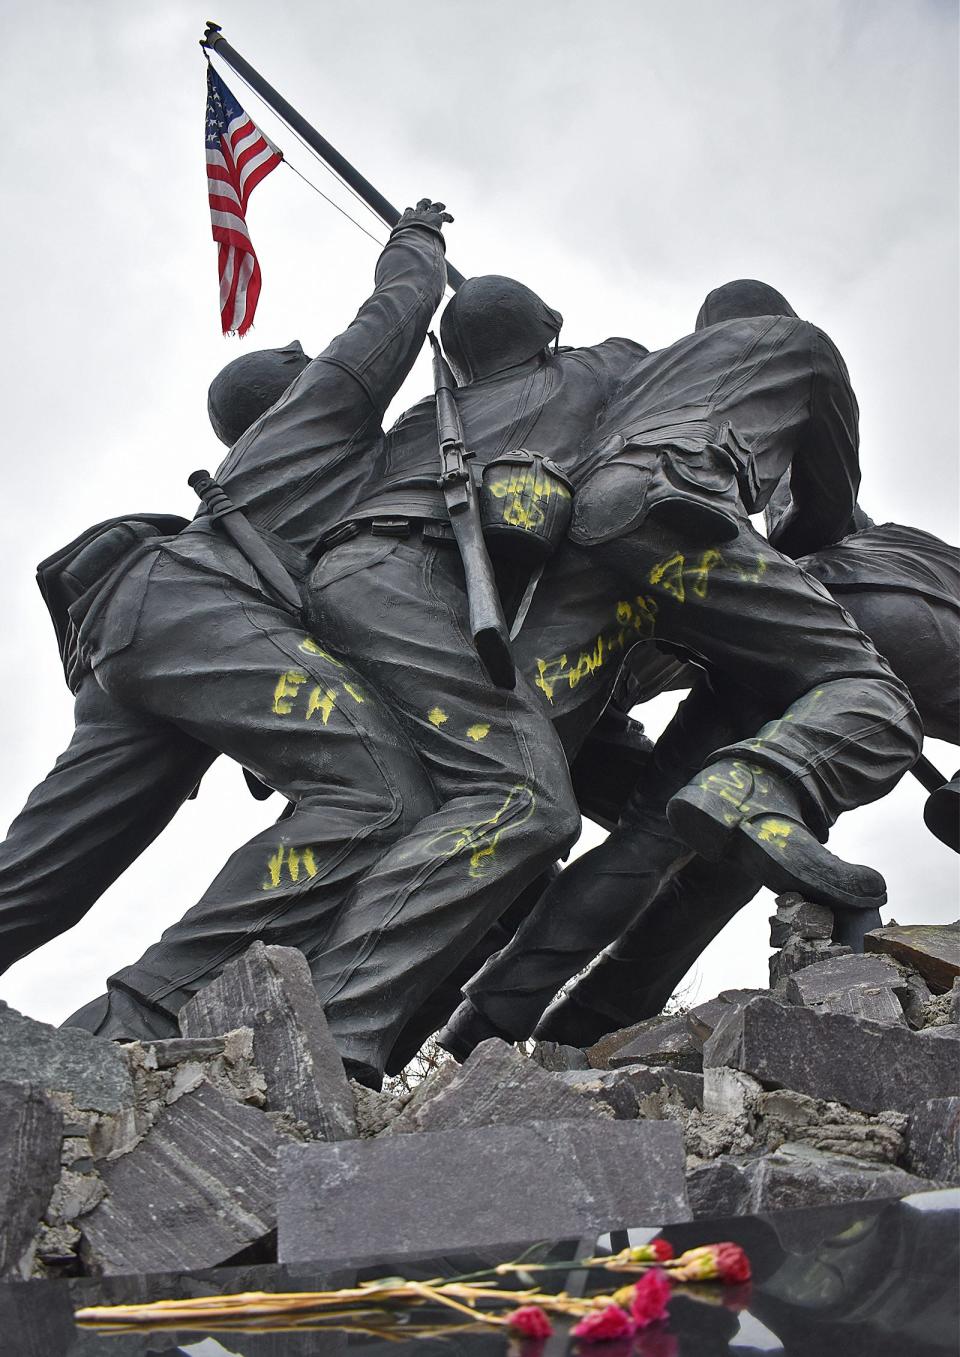 Vandals spray paint graffiti on the Iwo Jima Monument at Veterans Memorial Bicentennial Park and there is a police investigation with the police department's Major Crimes Unit.